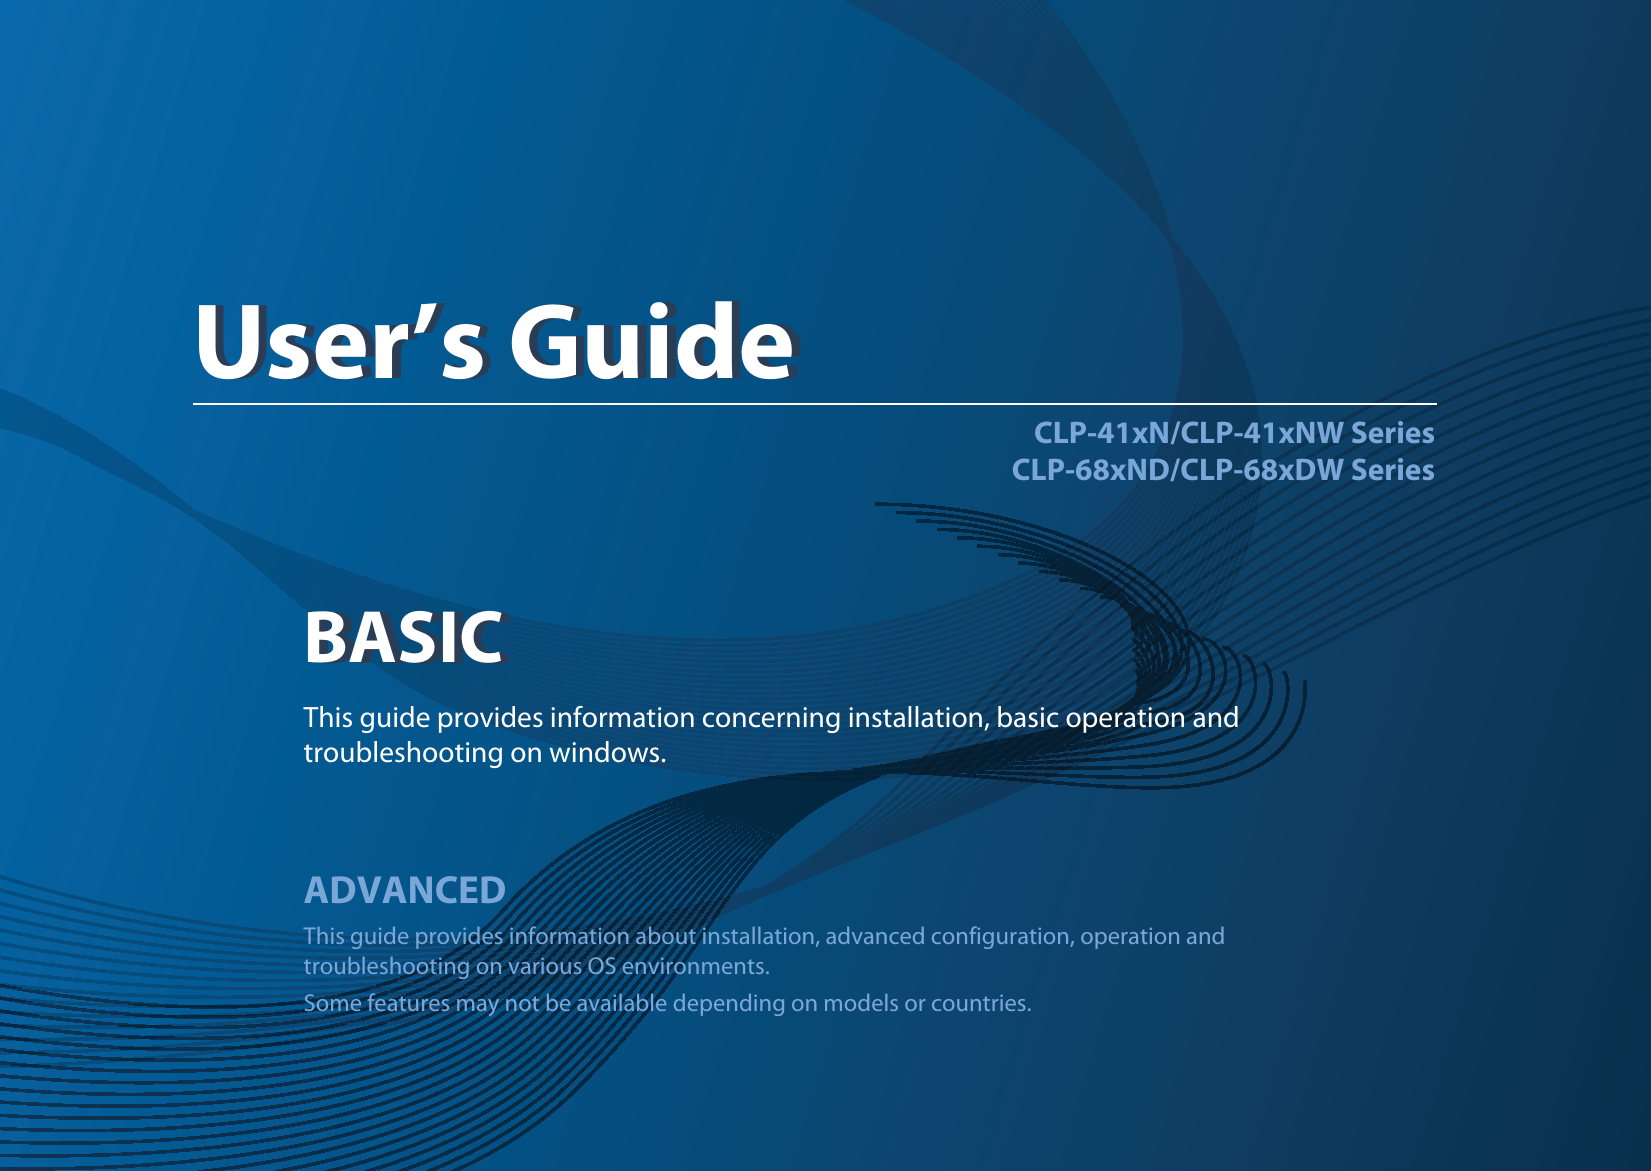 BASICUser’s GuideCLP-41xN/CLP-41xNW SeriesCLP-68xND/CLP-68xDW SeriesBASICUser’s GuideThis guide provides information concerning installation, basic operation and troubleshooting on windows.ADVANCEDThis guide provides information about installation, advanced configuration, operation and troubleshooting on various OS environments. Some features may not be available depending on models or countries.